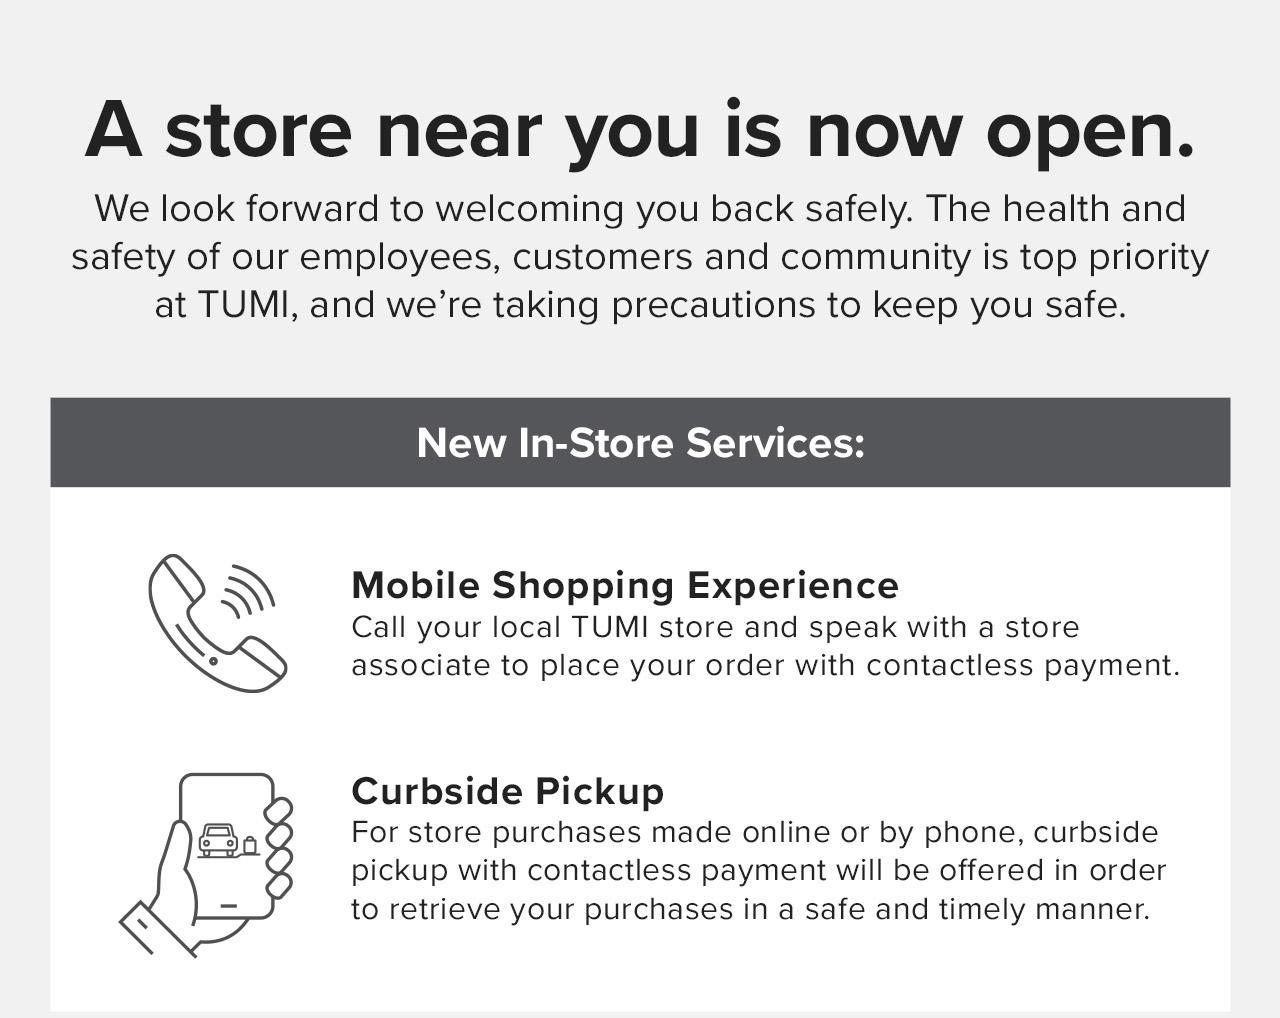 A store near you is now open. New In-Store Services: Mobile Shopping Experience. Curbside Pickup.